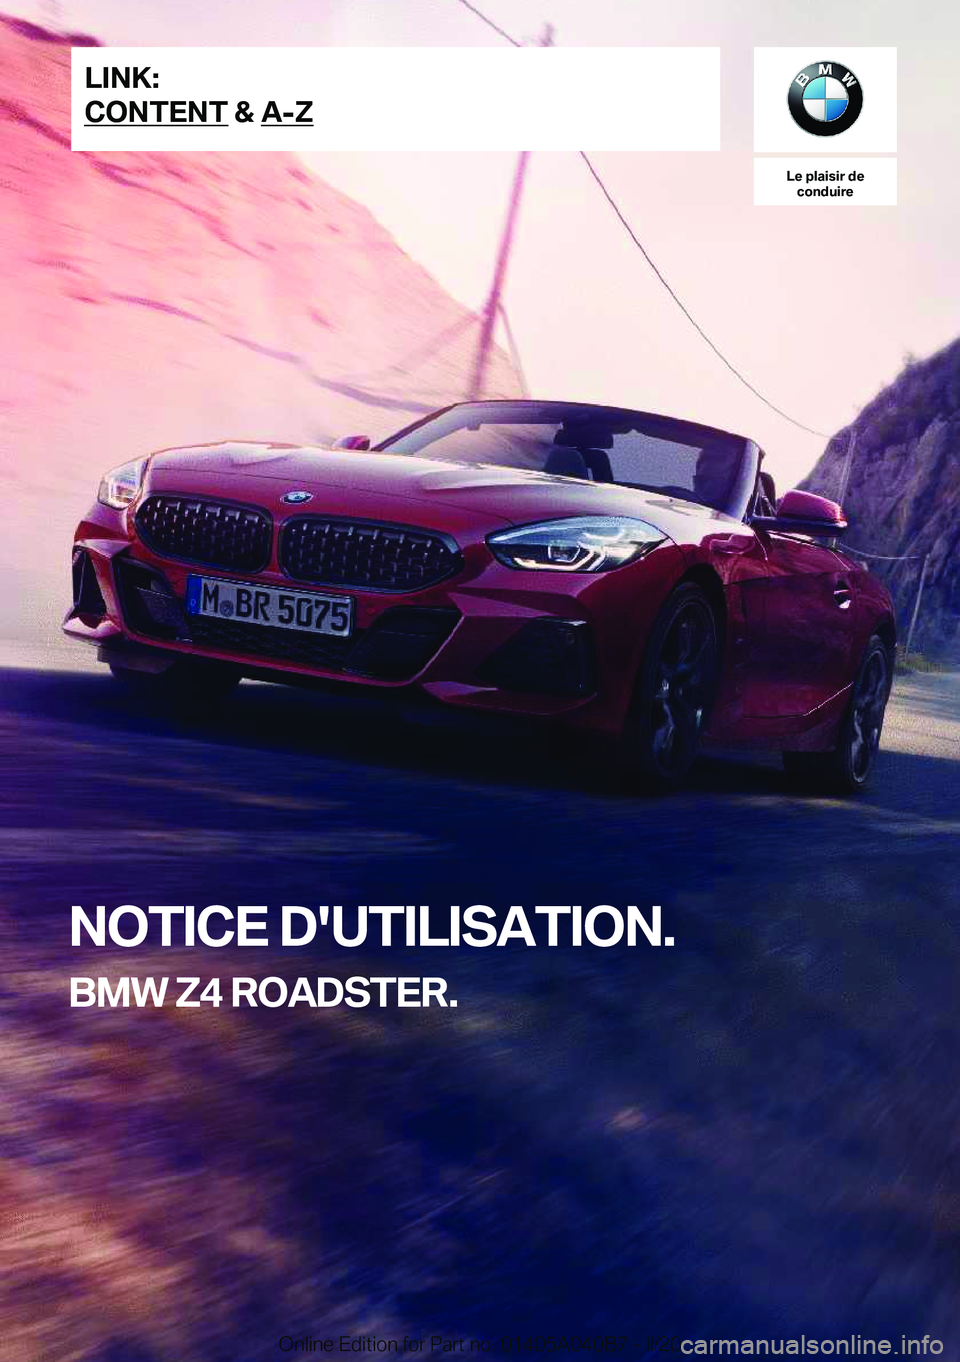 BMW Z4 2020  Notices Demploi (in French) �L�e��p�l�a�i�s�i�r��d�e�c�o�n�d�u�i�r�e
�N�O�T�I�C�E��D�'�U�T�I�L�I�S�A�T�I�O�N�.
�B�M�W��Z�4��R�O�A�D�S�T�E�R�.�L�I�N�K�:
�C�O�N�T�E�N�T��&��A�-�Z�O�n�l�i�n�e��E�d�i�t�i�o�n��f�o�r��P�